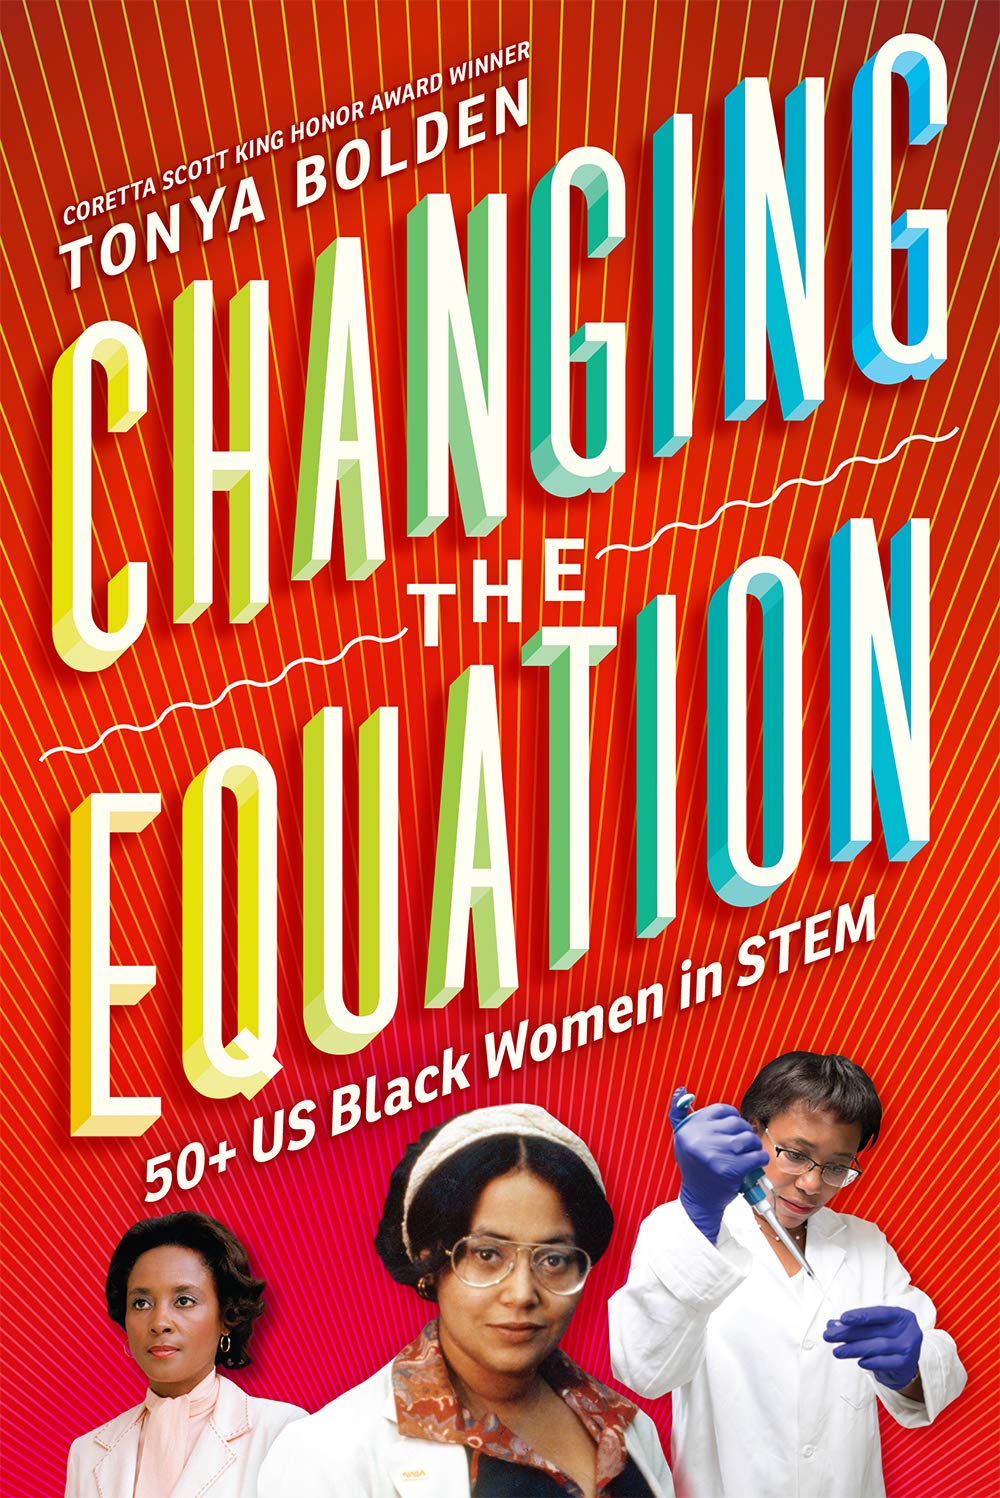 Changing the Equation: 50+ US Black Women in Stem (Hardcover)